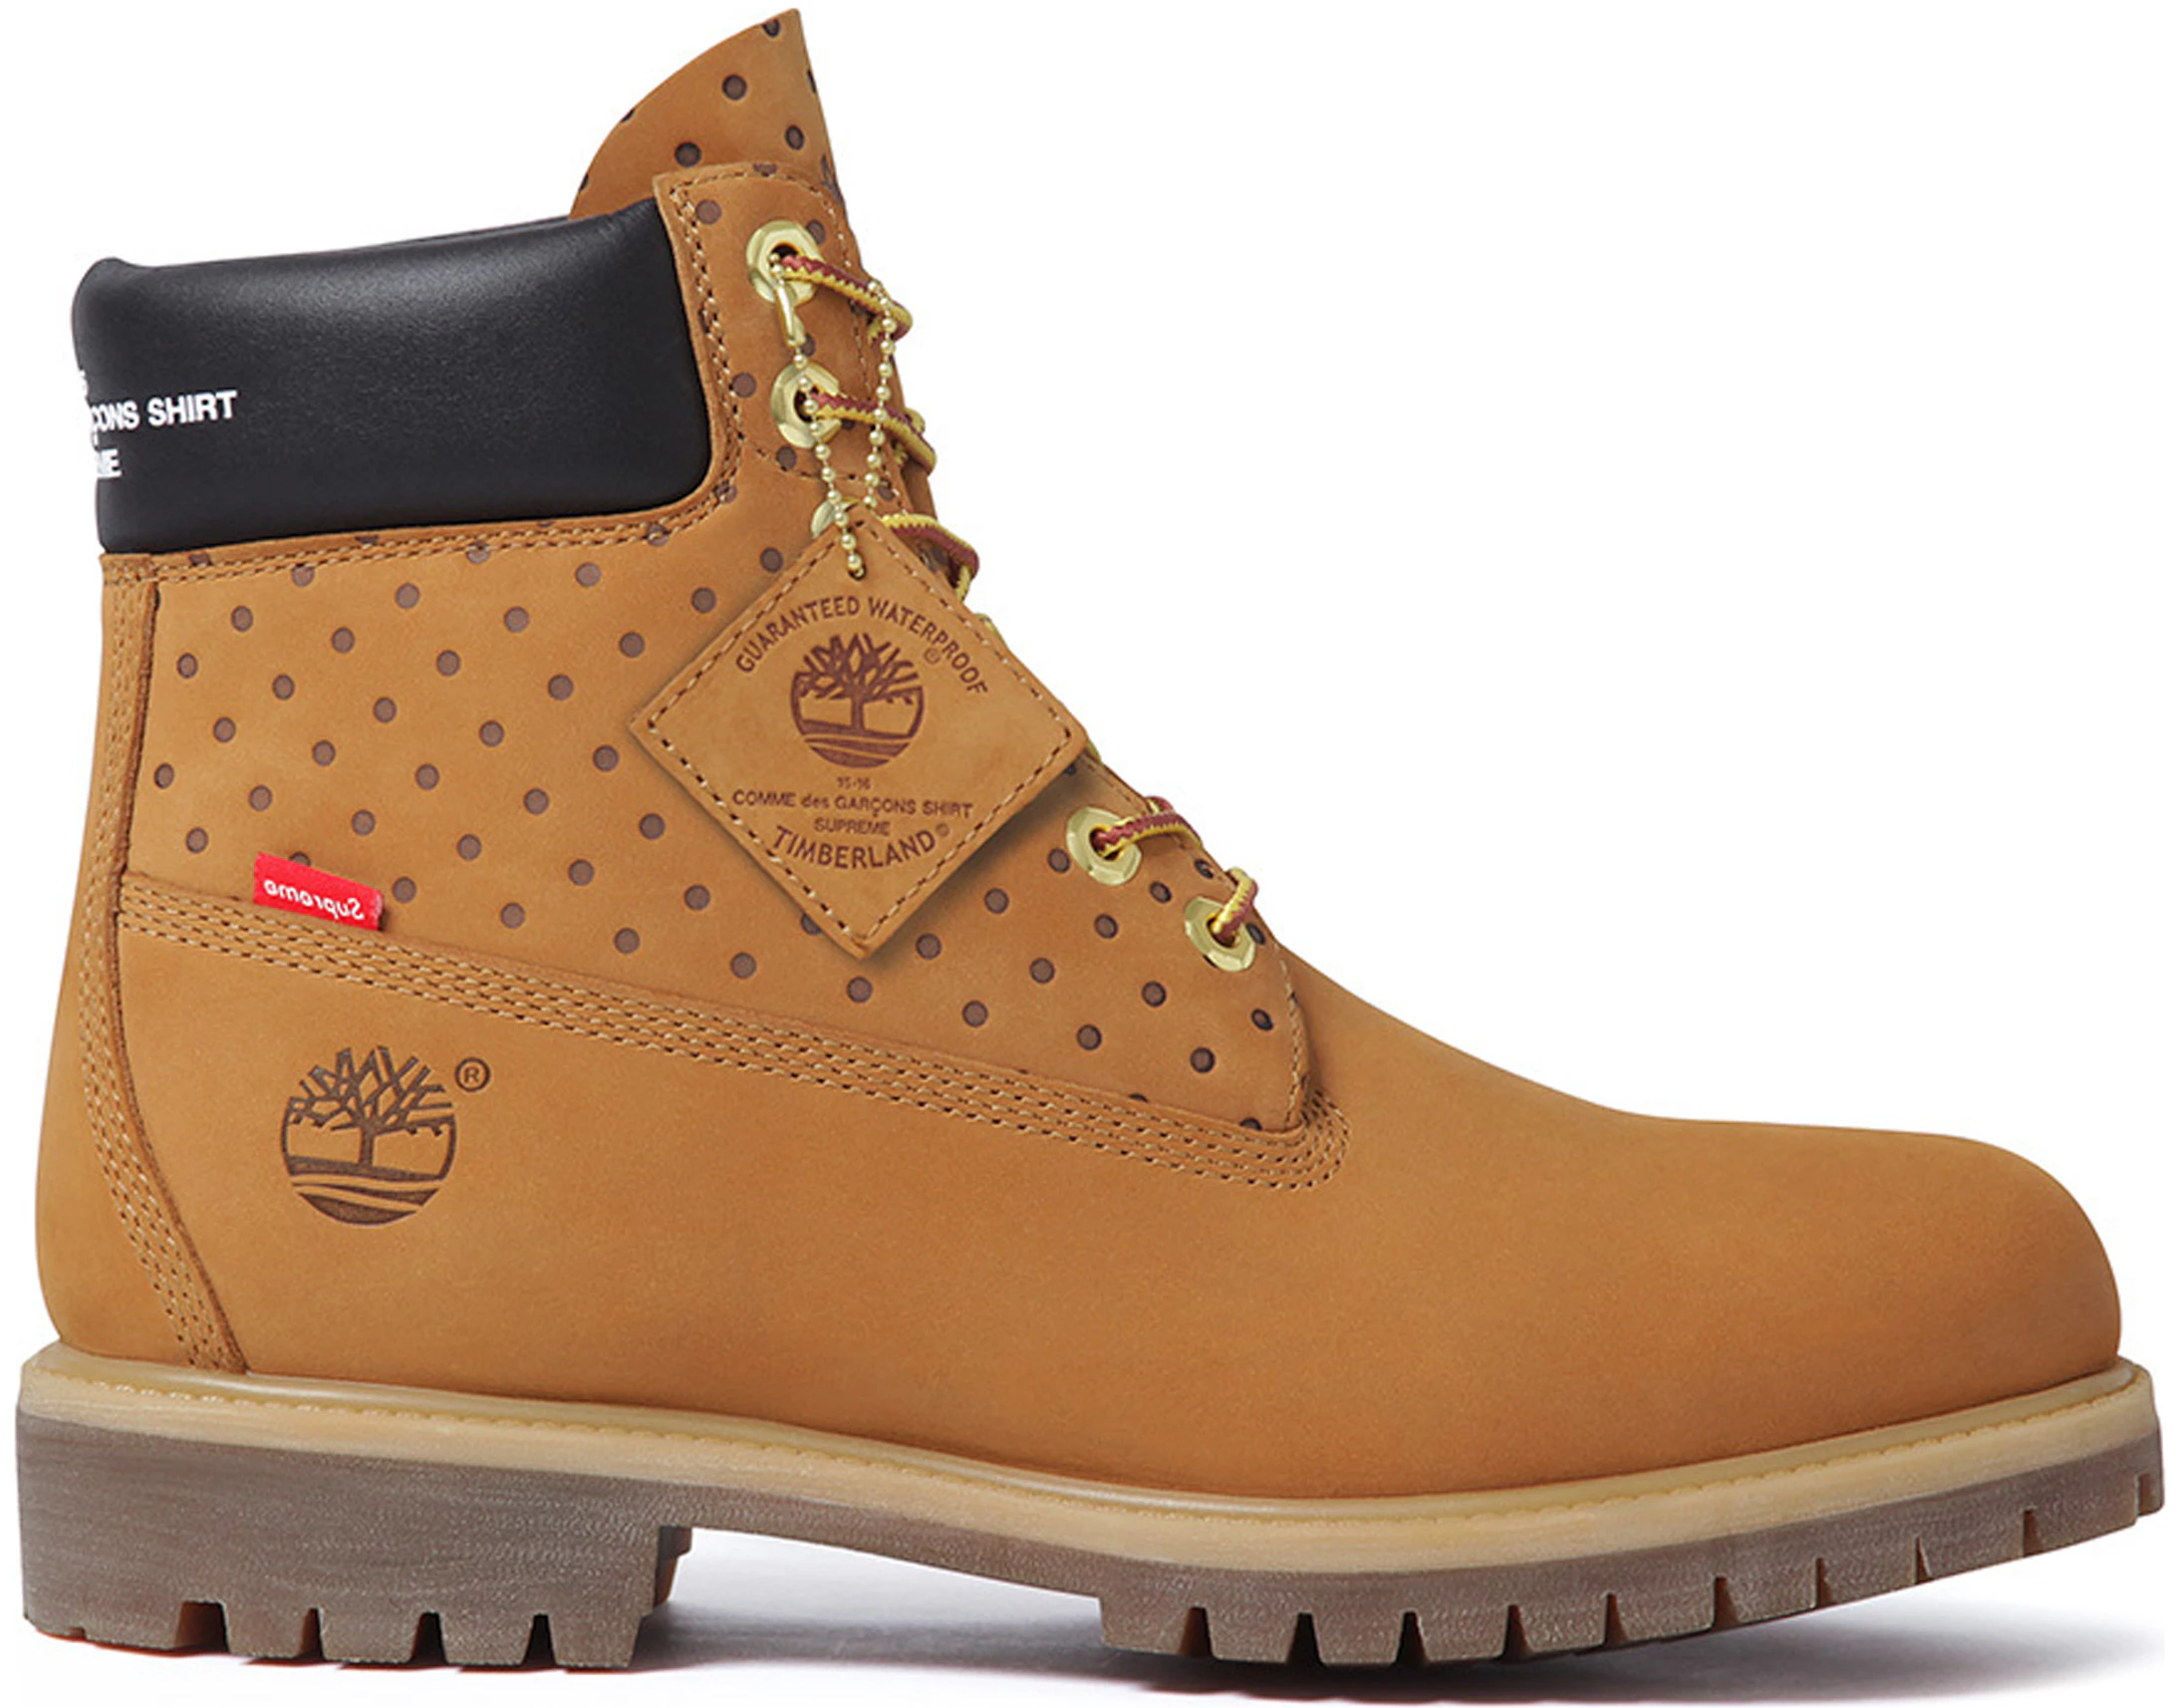 langzaam sneeuw Rond en rond Timberland 6" Boot Supreme x Comme des Garcons Wheat - TB0A14MC - US